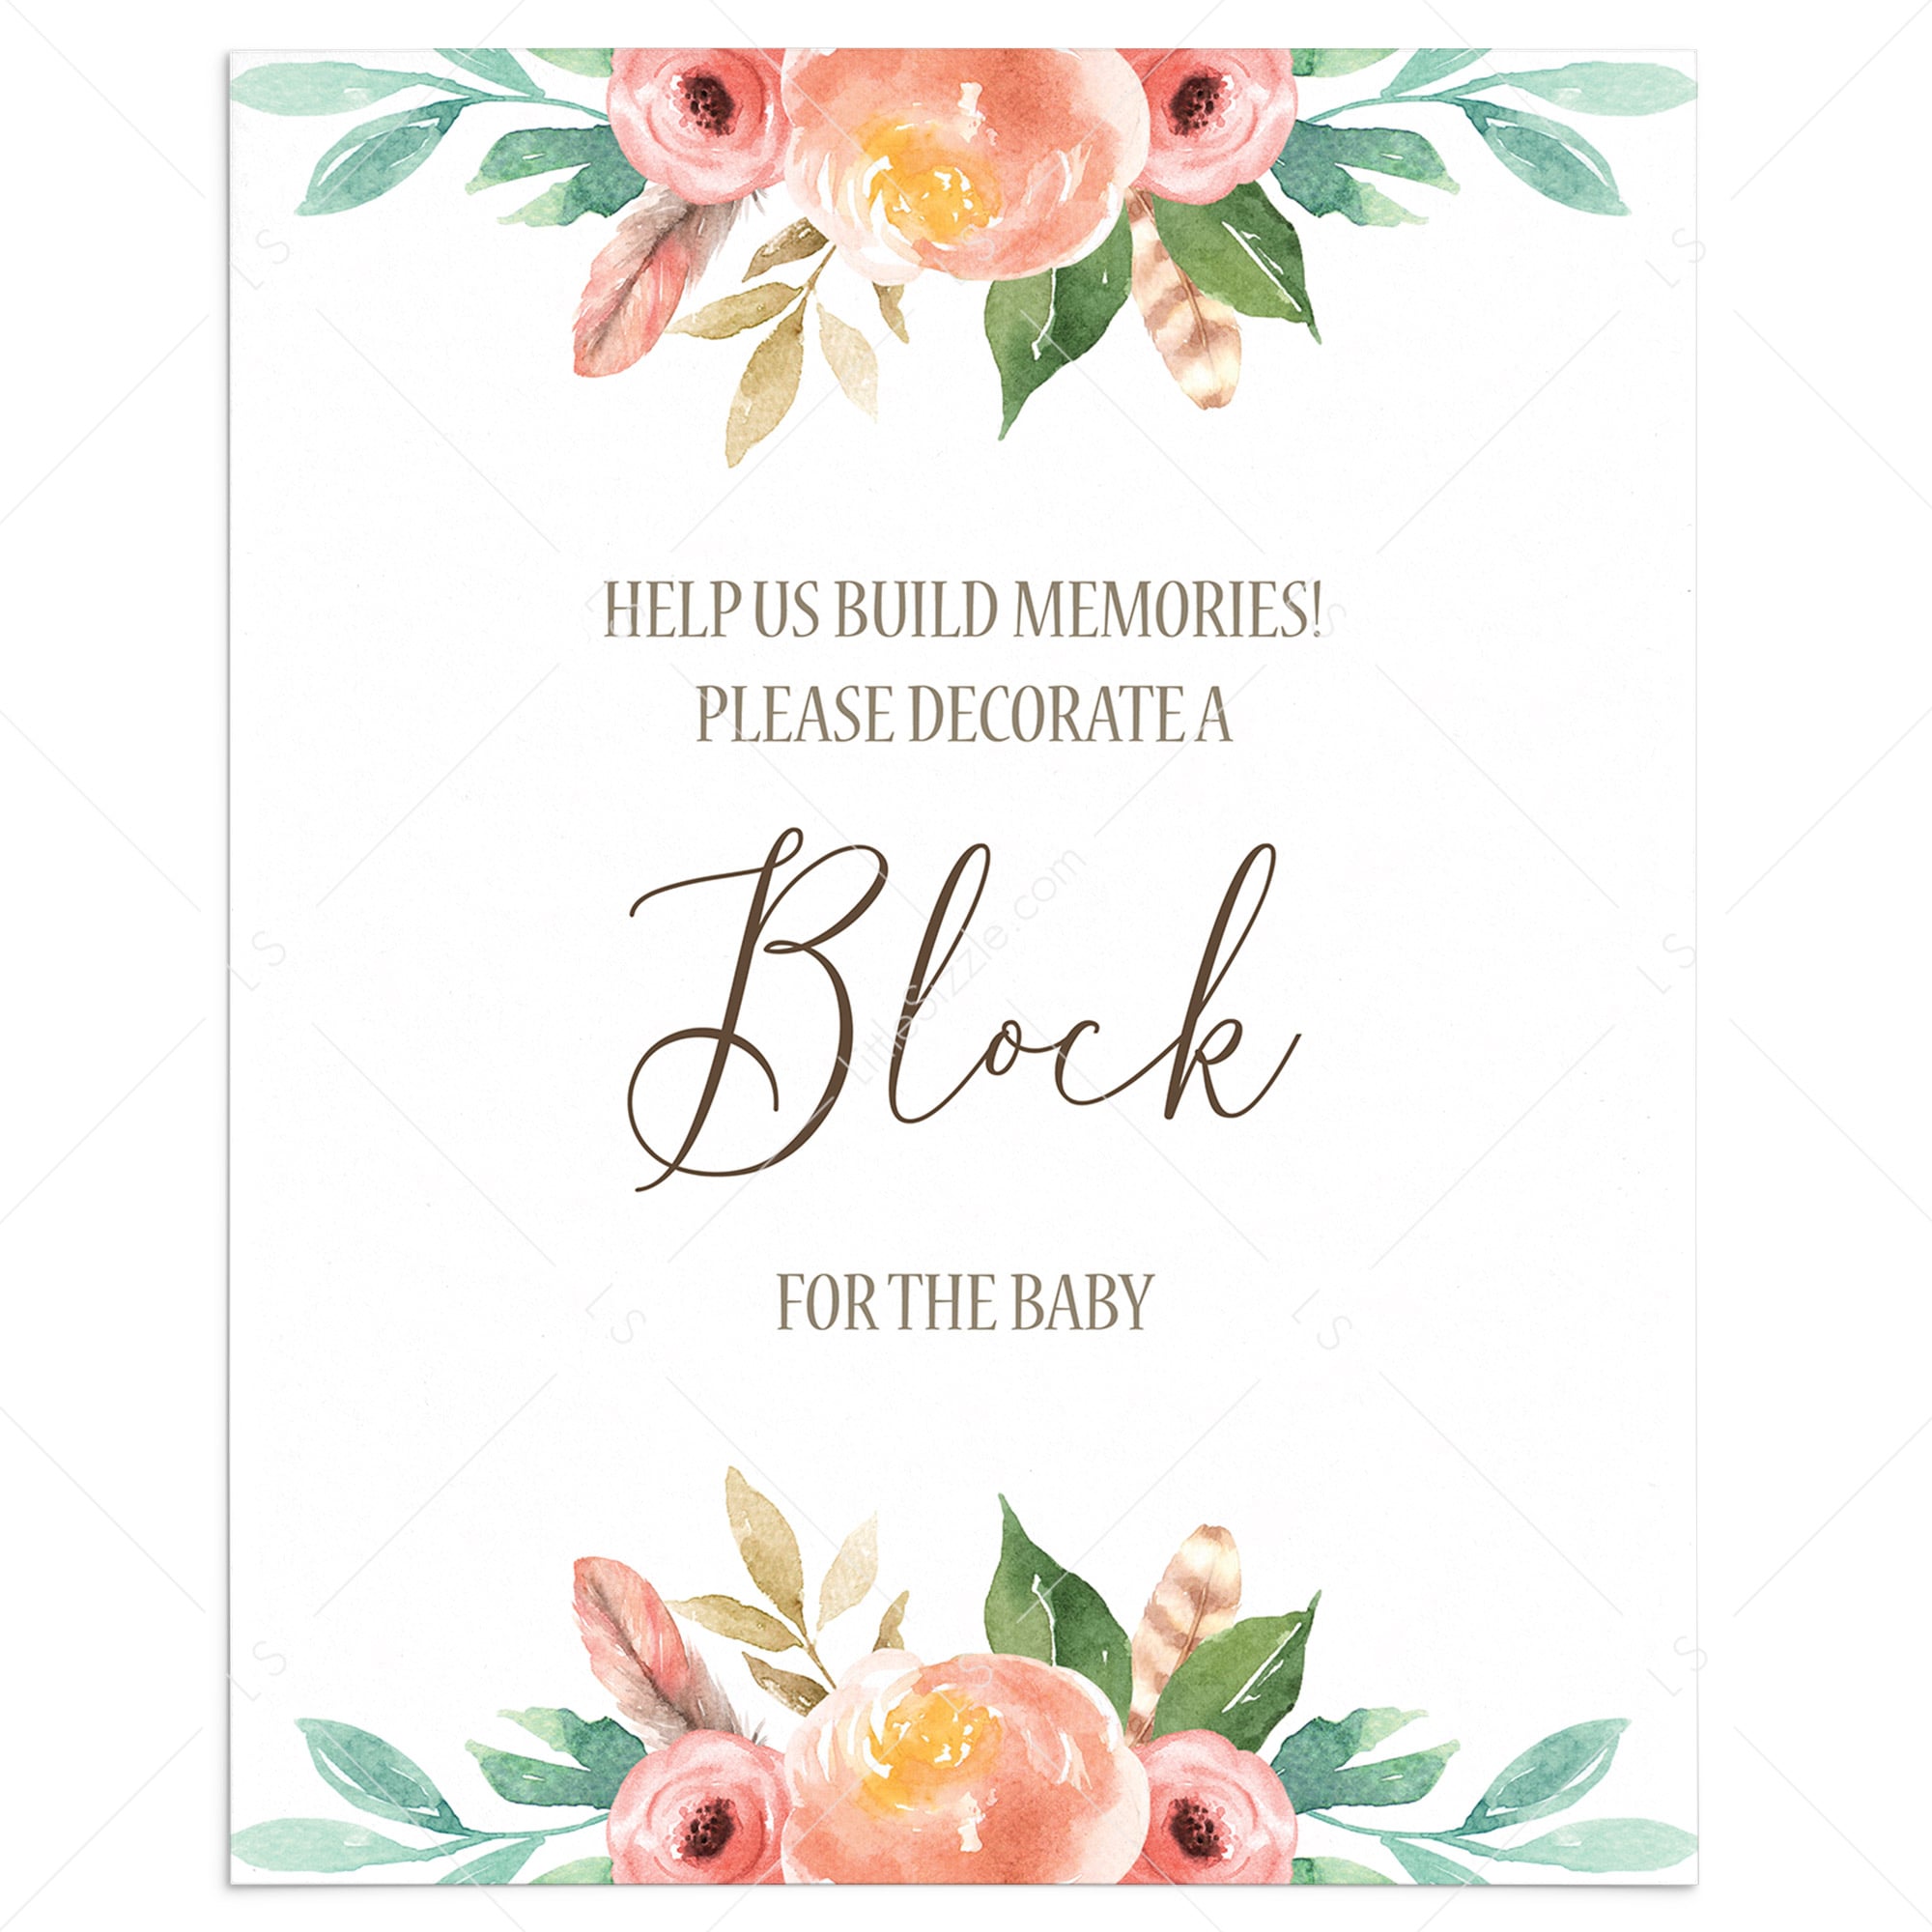 Help us Build Memories Baby Shower Activity Sign by LittleSizzle